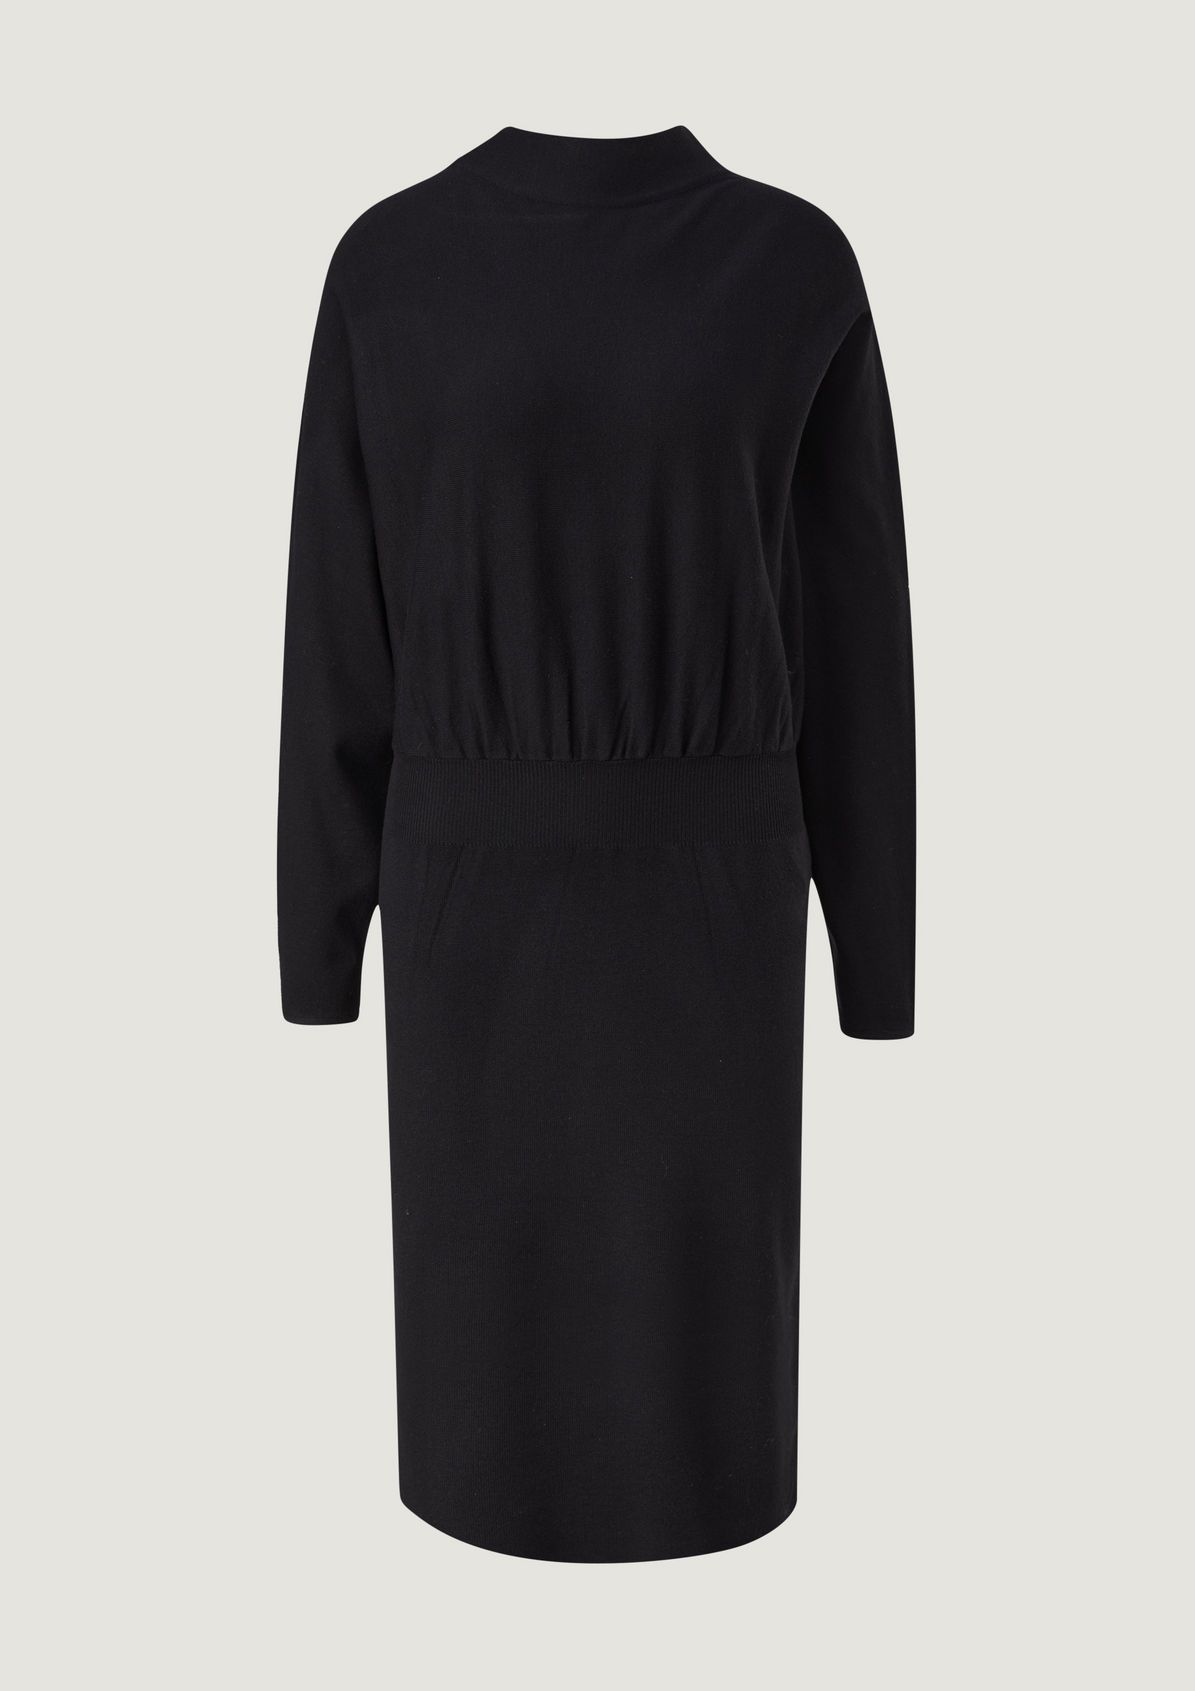 Knitted dress in a viscose blend from comma